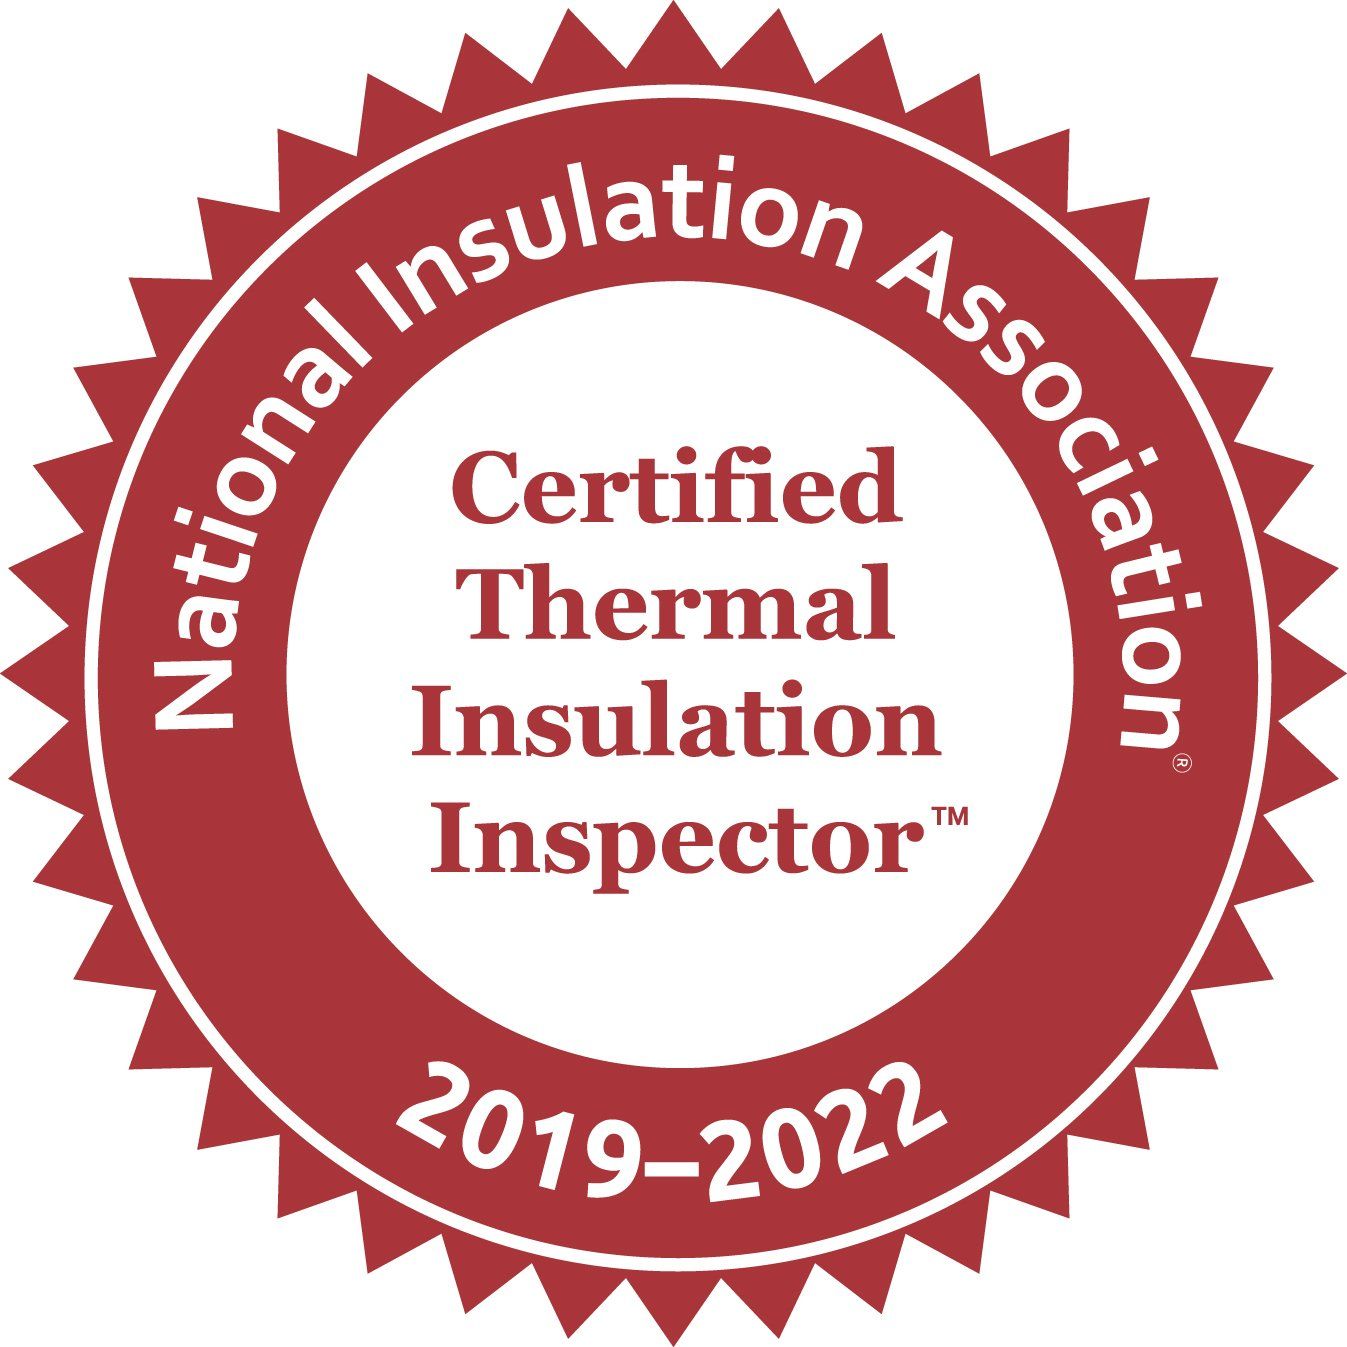 a national insulation association certified thermal insulation inspector logo